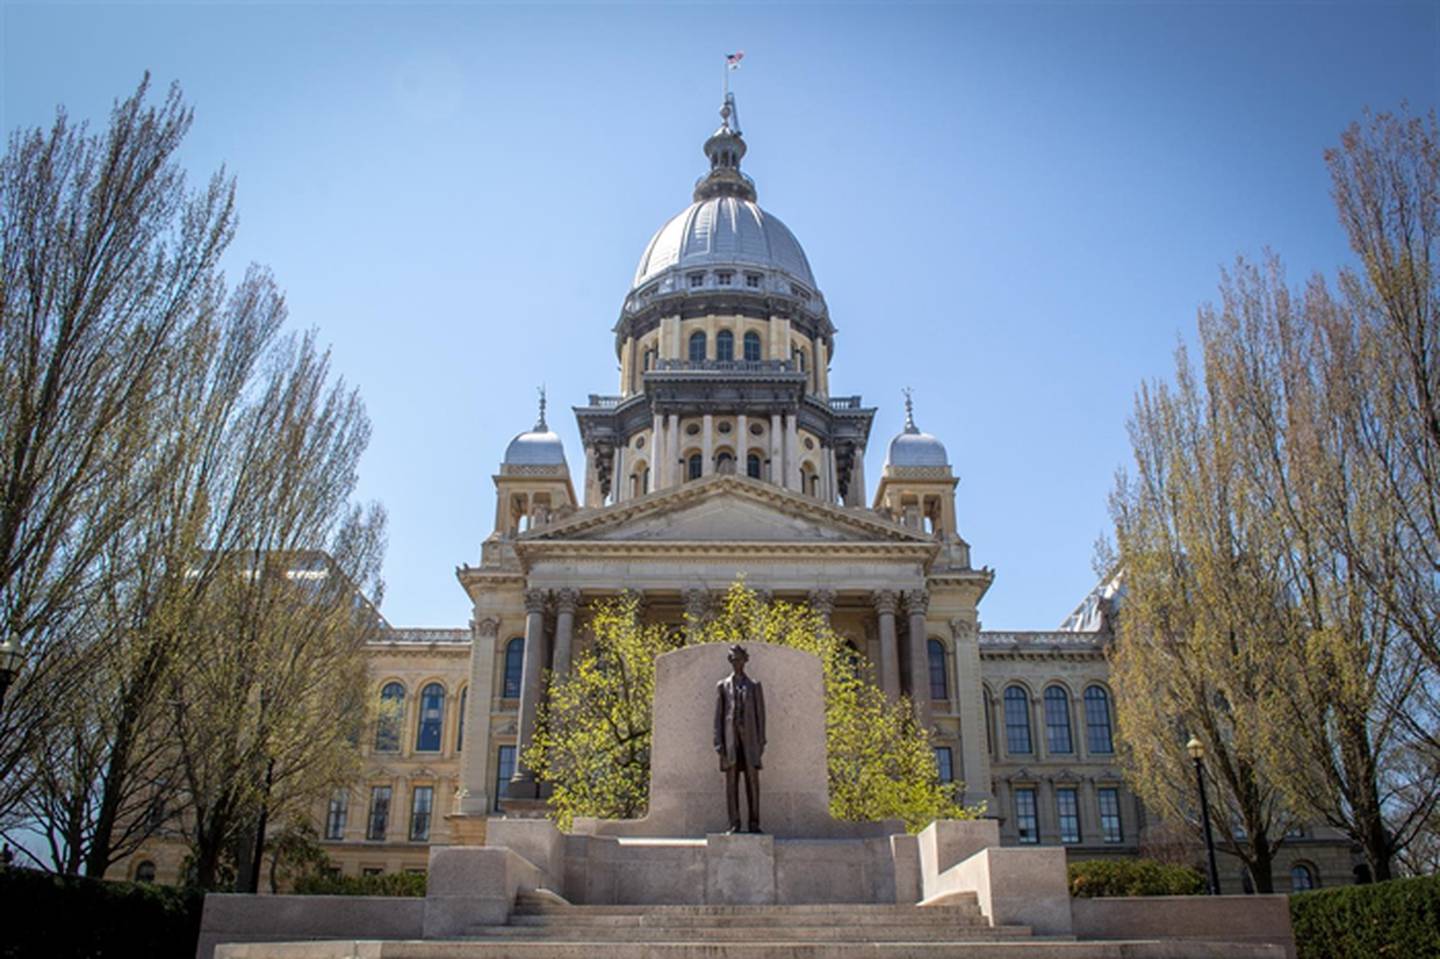 The Illinois State Capitol is pictured in Springfield.